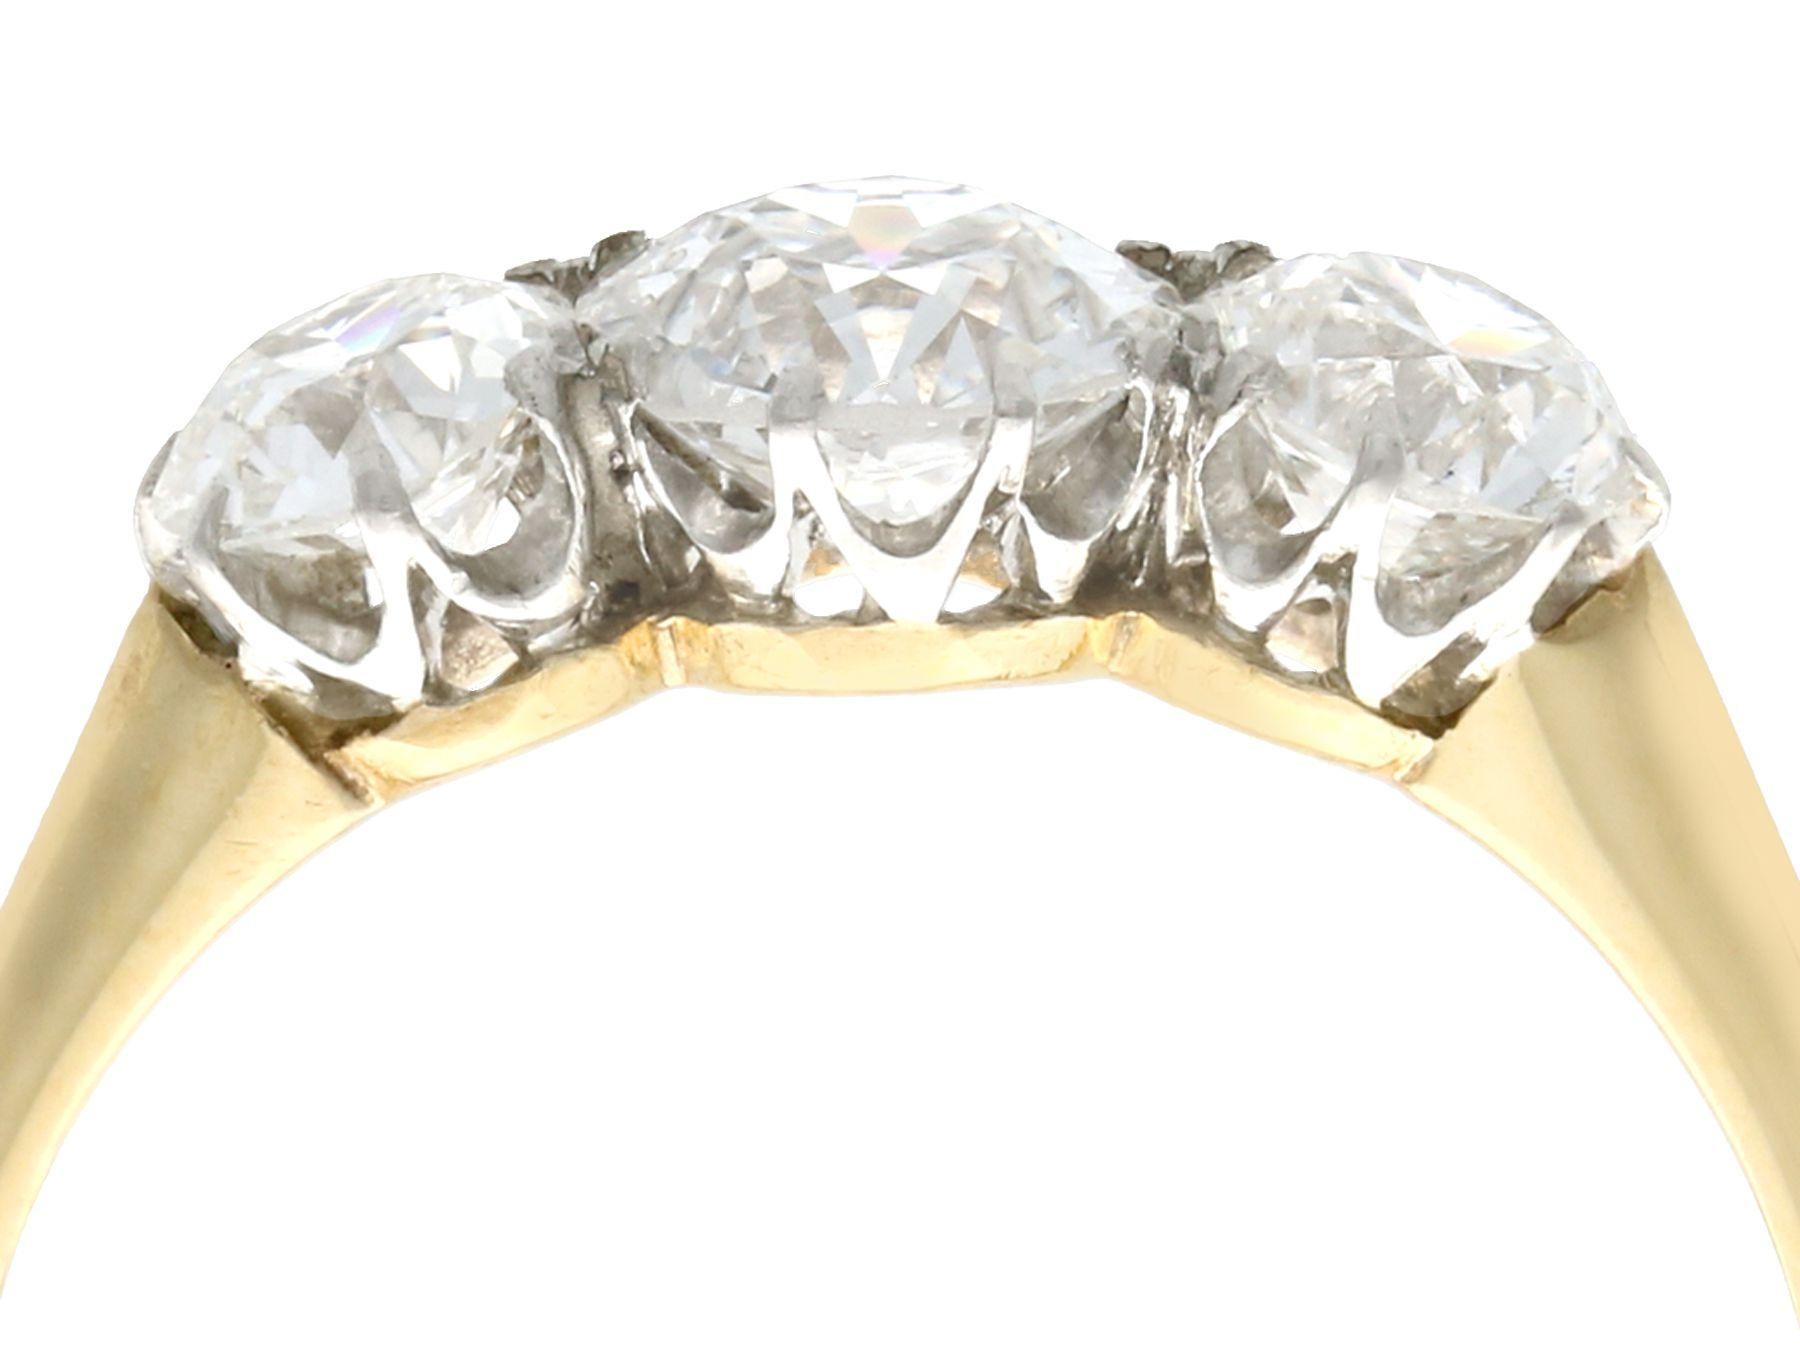 A stunning, fine and impressive antique 1.56 carat diamond, 18 karat yellow gold and platinum trilogy ring; part of our diverse antique jewellery and estate jewelry collections.

This stunning, fine and impressive antique trilogy ring has been